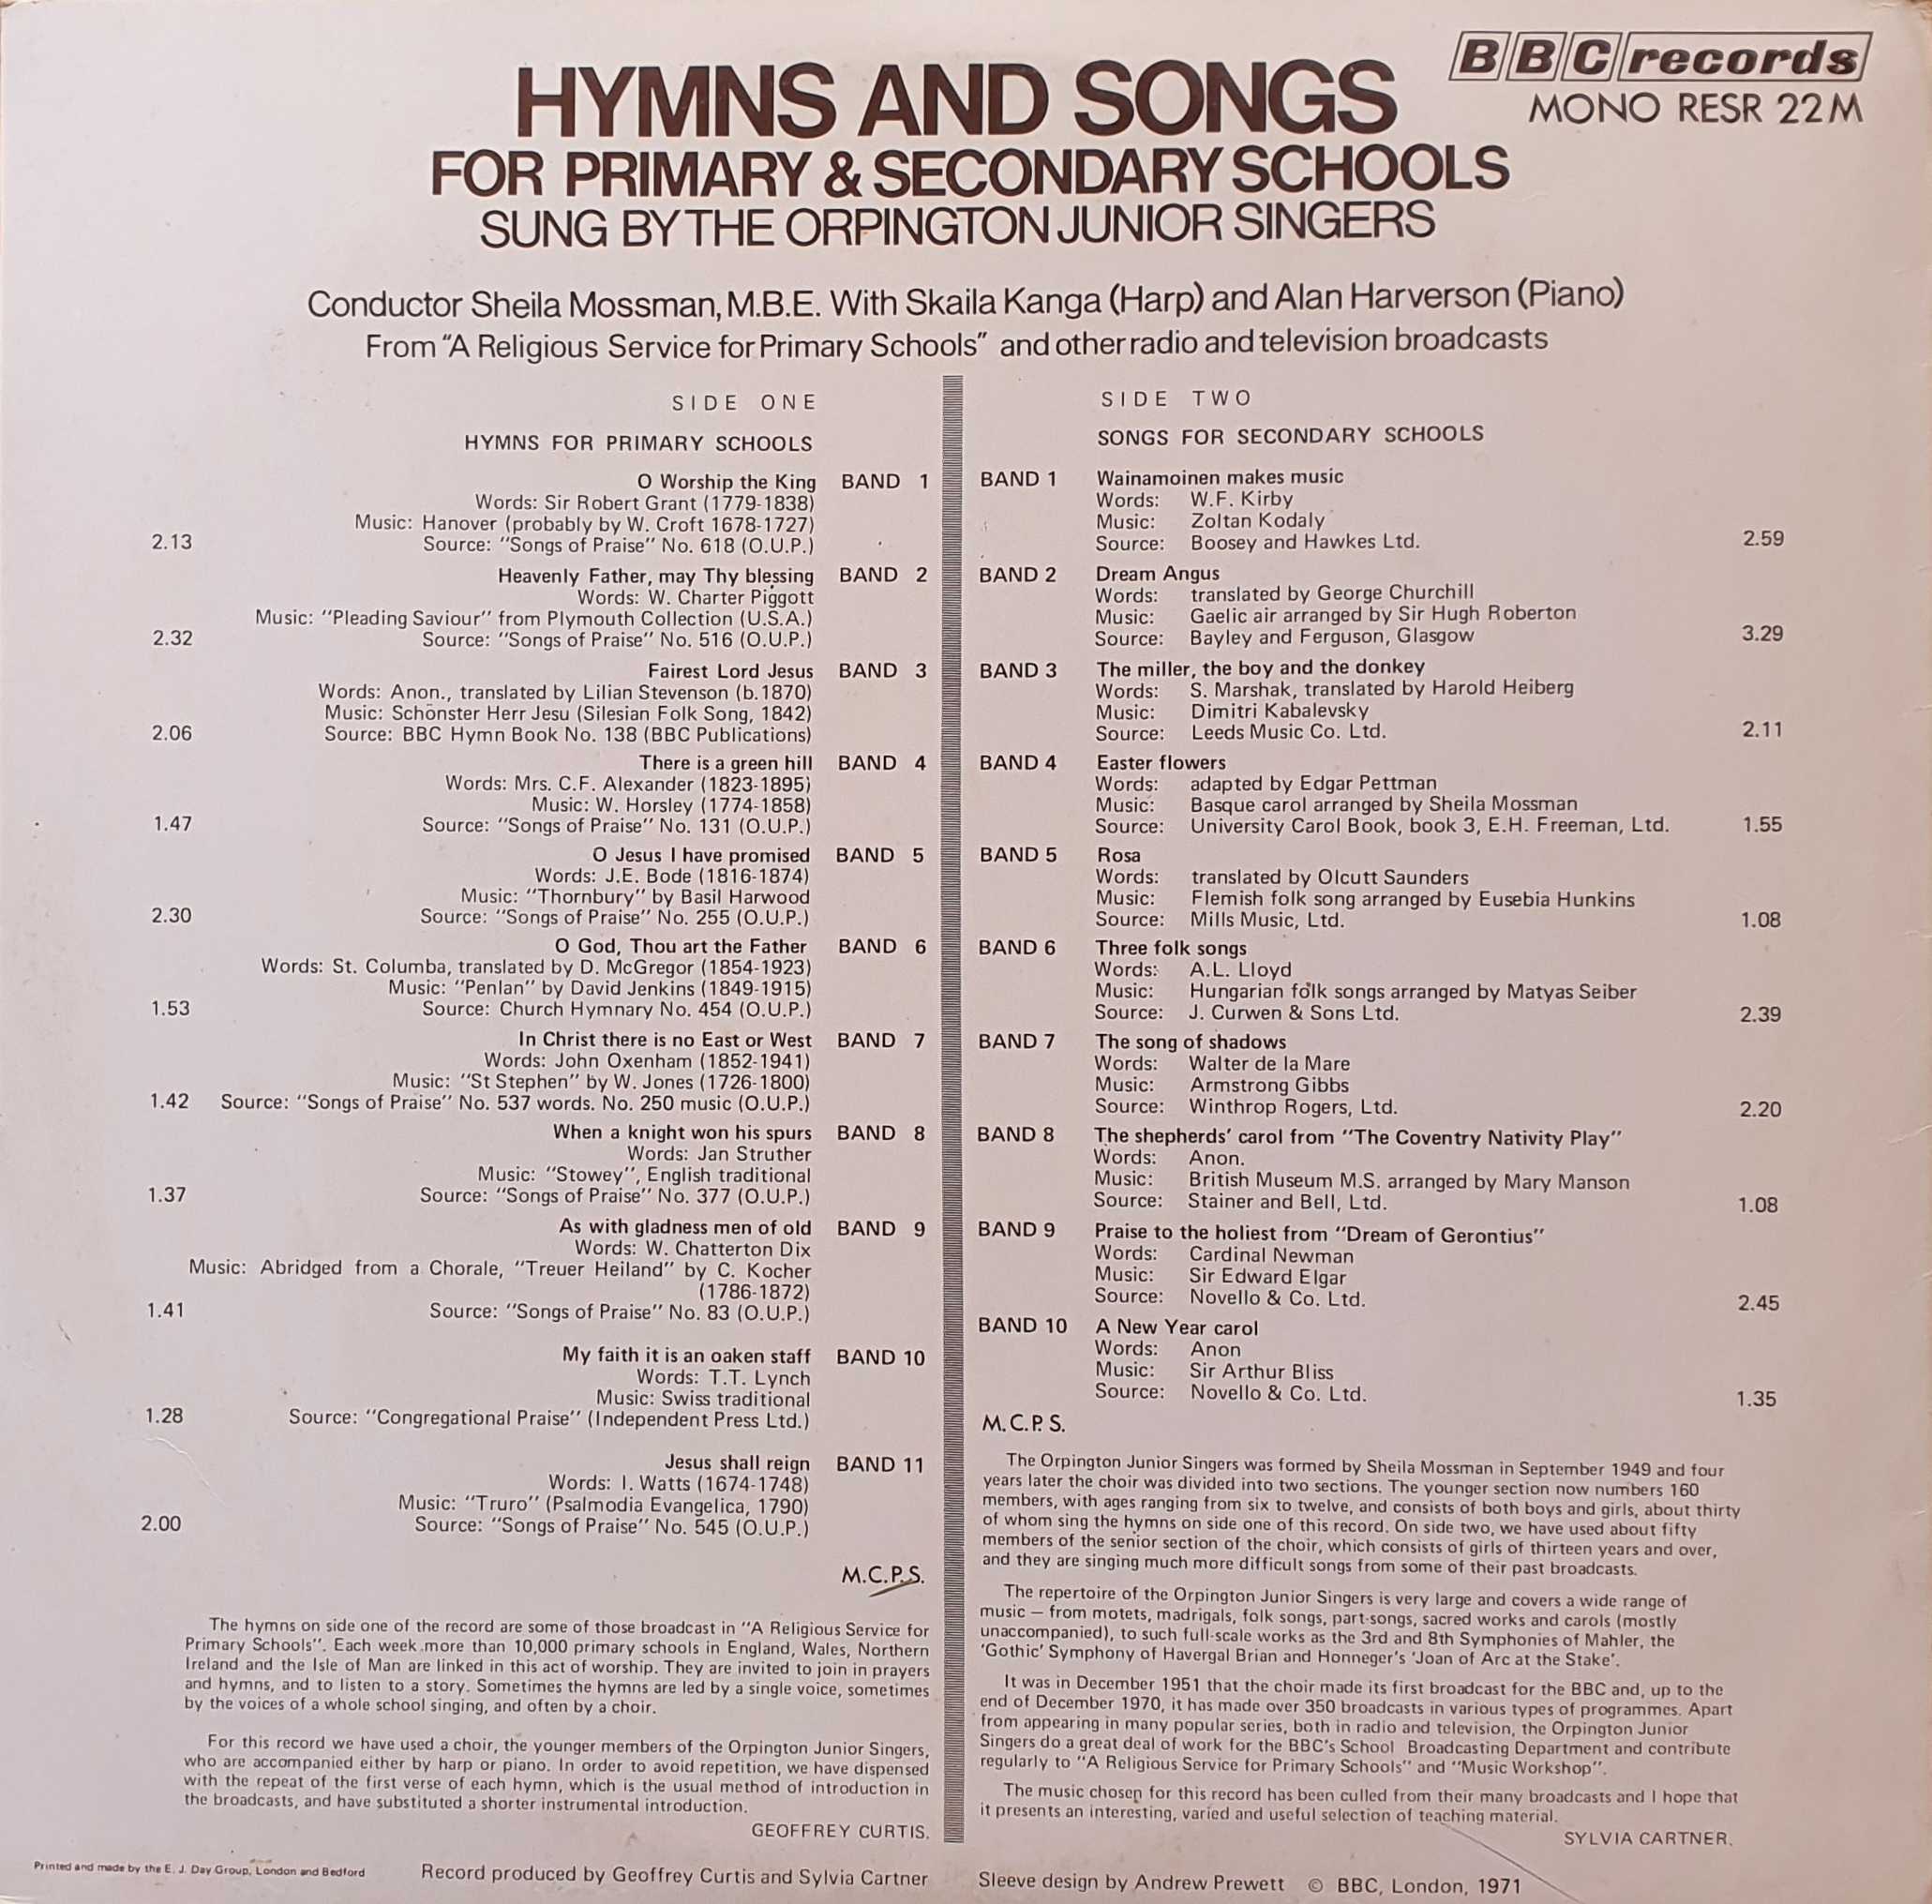 Picture of RESR 22 Hymns and songs for Primary and Secondary schools by artist Various / Oprington Junior Singers from the BBC records and Tapes library